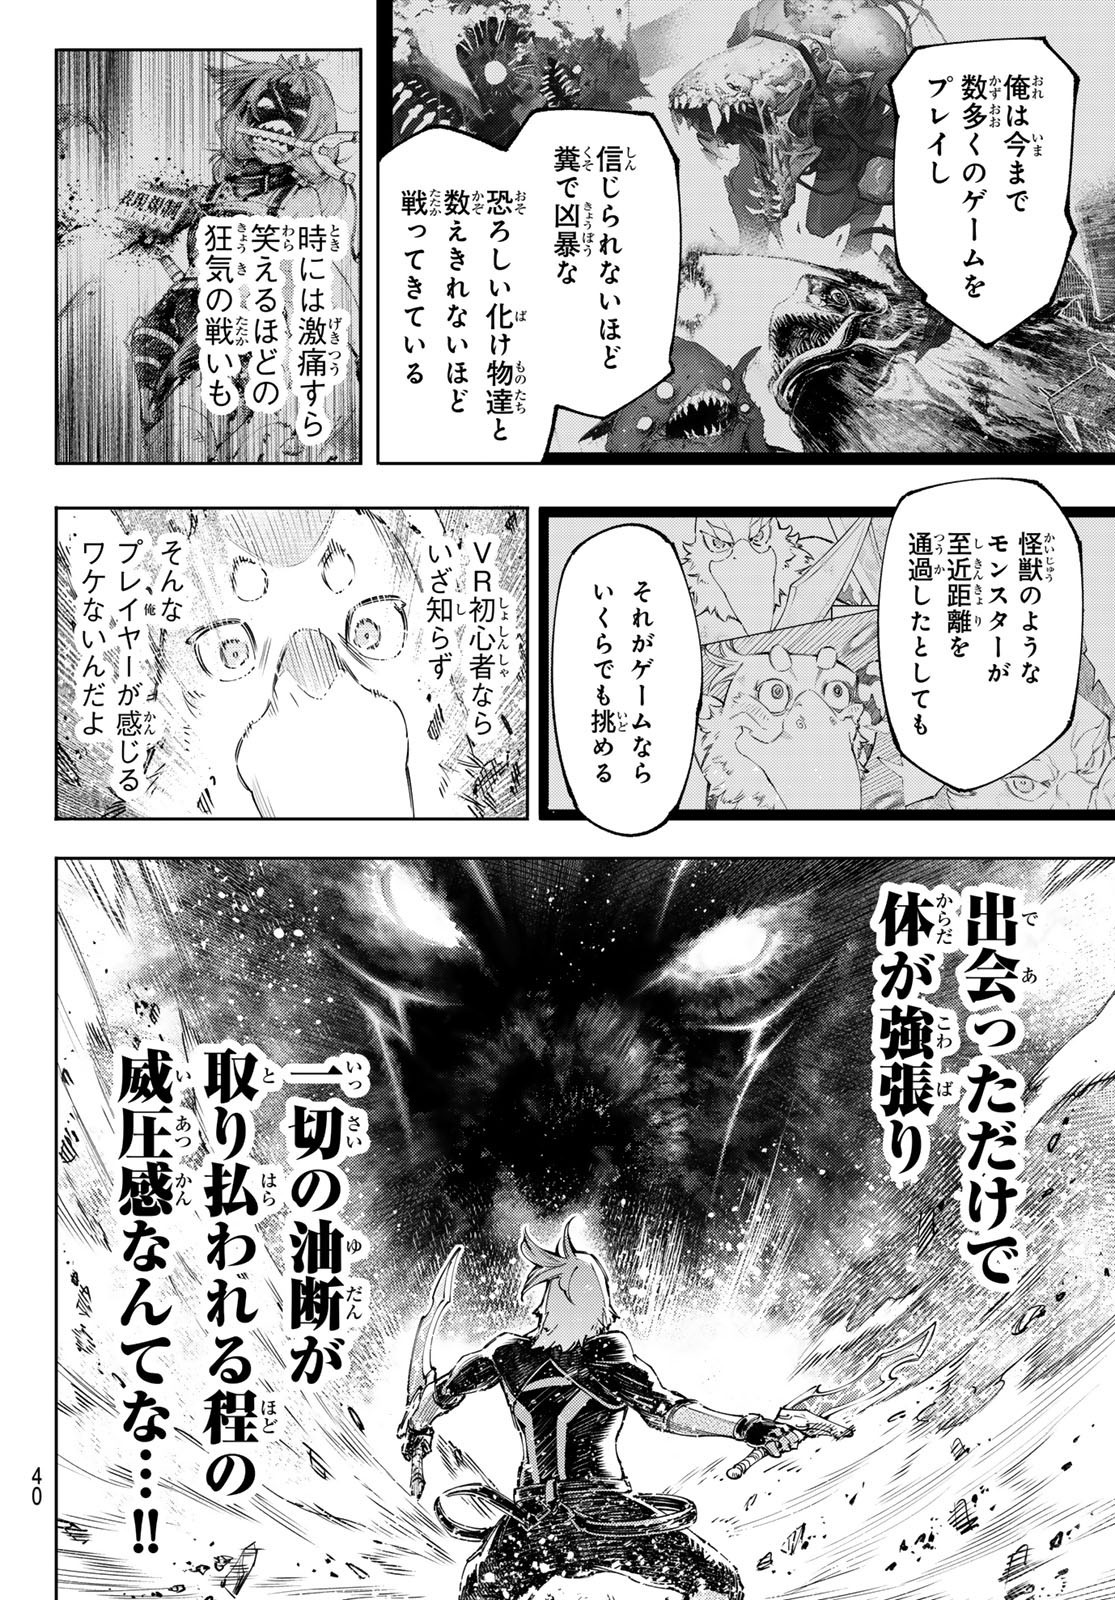 Weekly Shōnen Magazine - 週刊少年マガジン - Chapter 2024-24 - Page 40